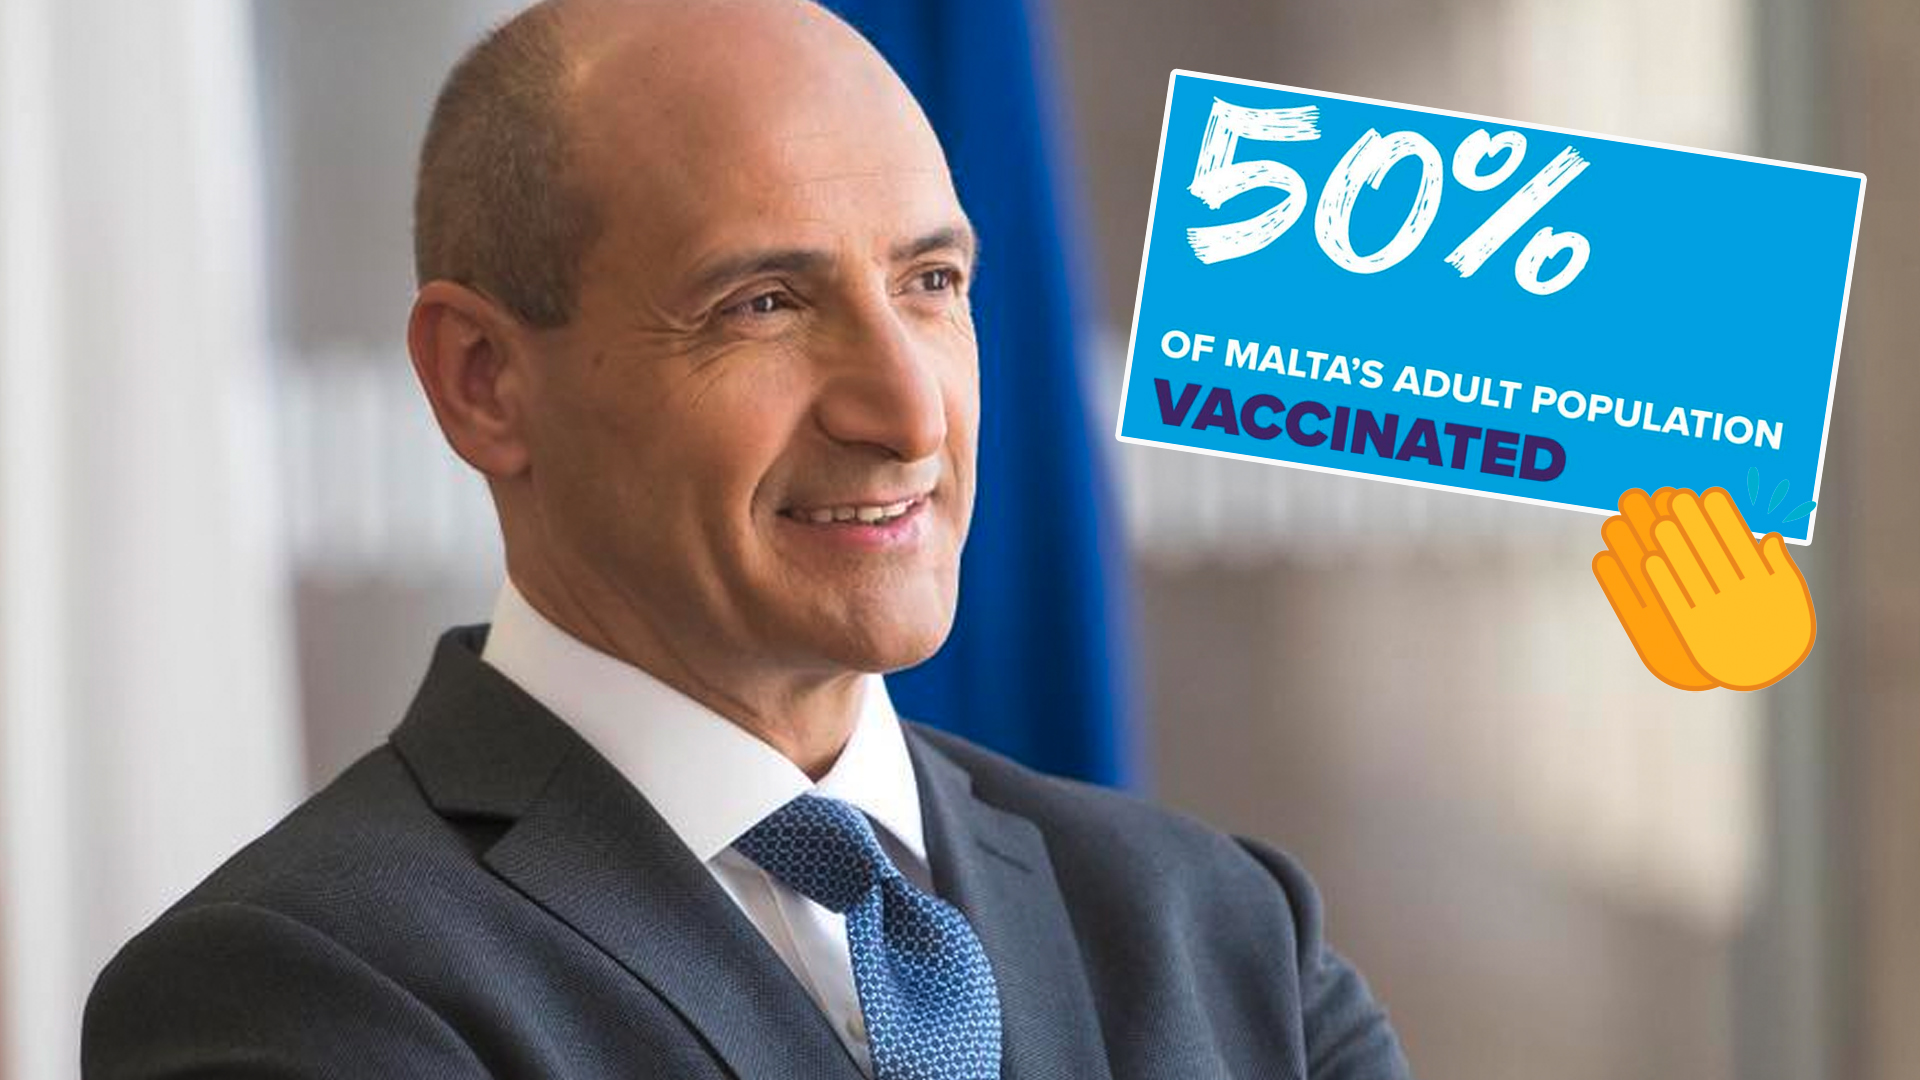 50% of Maltese adult population vaccinated